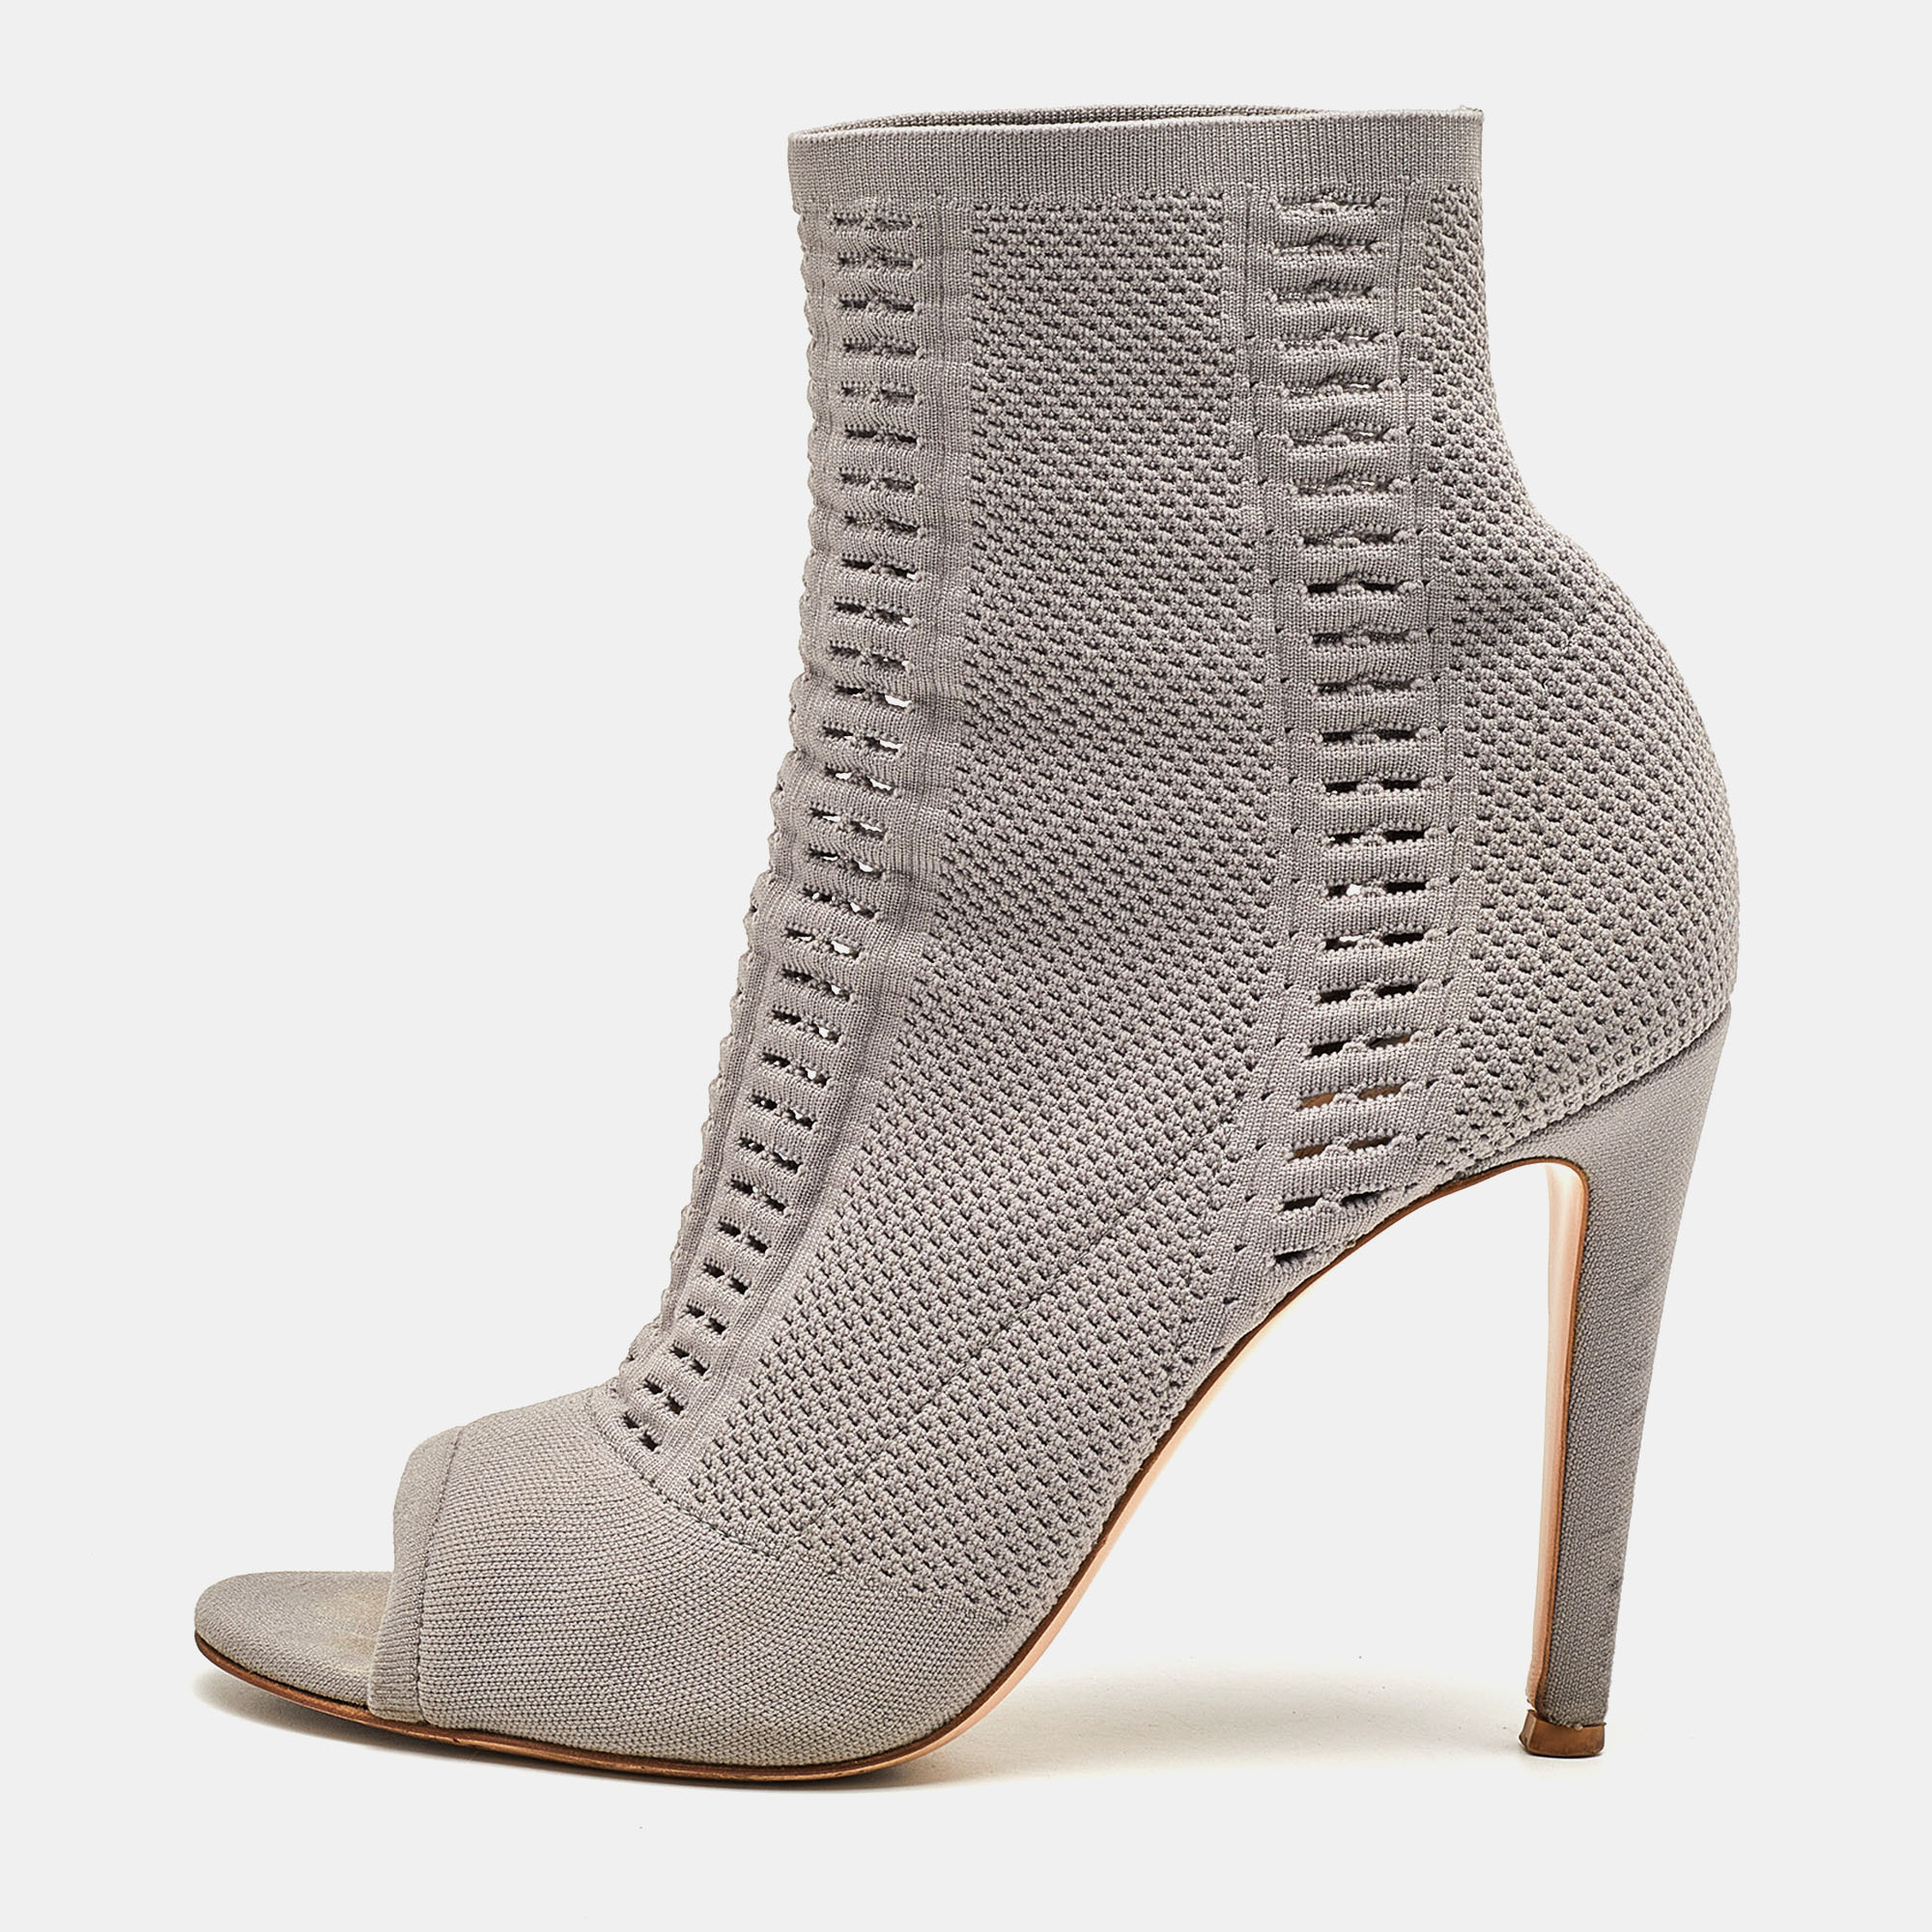 Pre-owned Gianvito Rossi Grey Knit Fabric Vires Ankle Booties Size 40.5